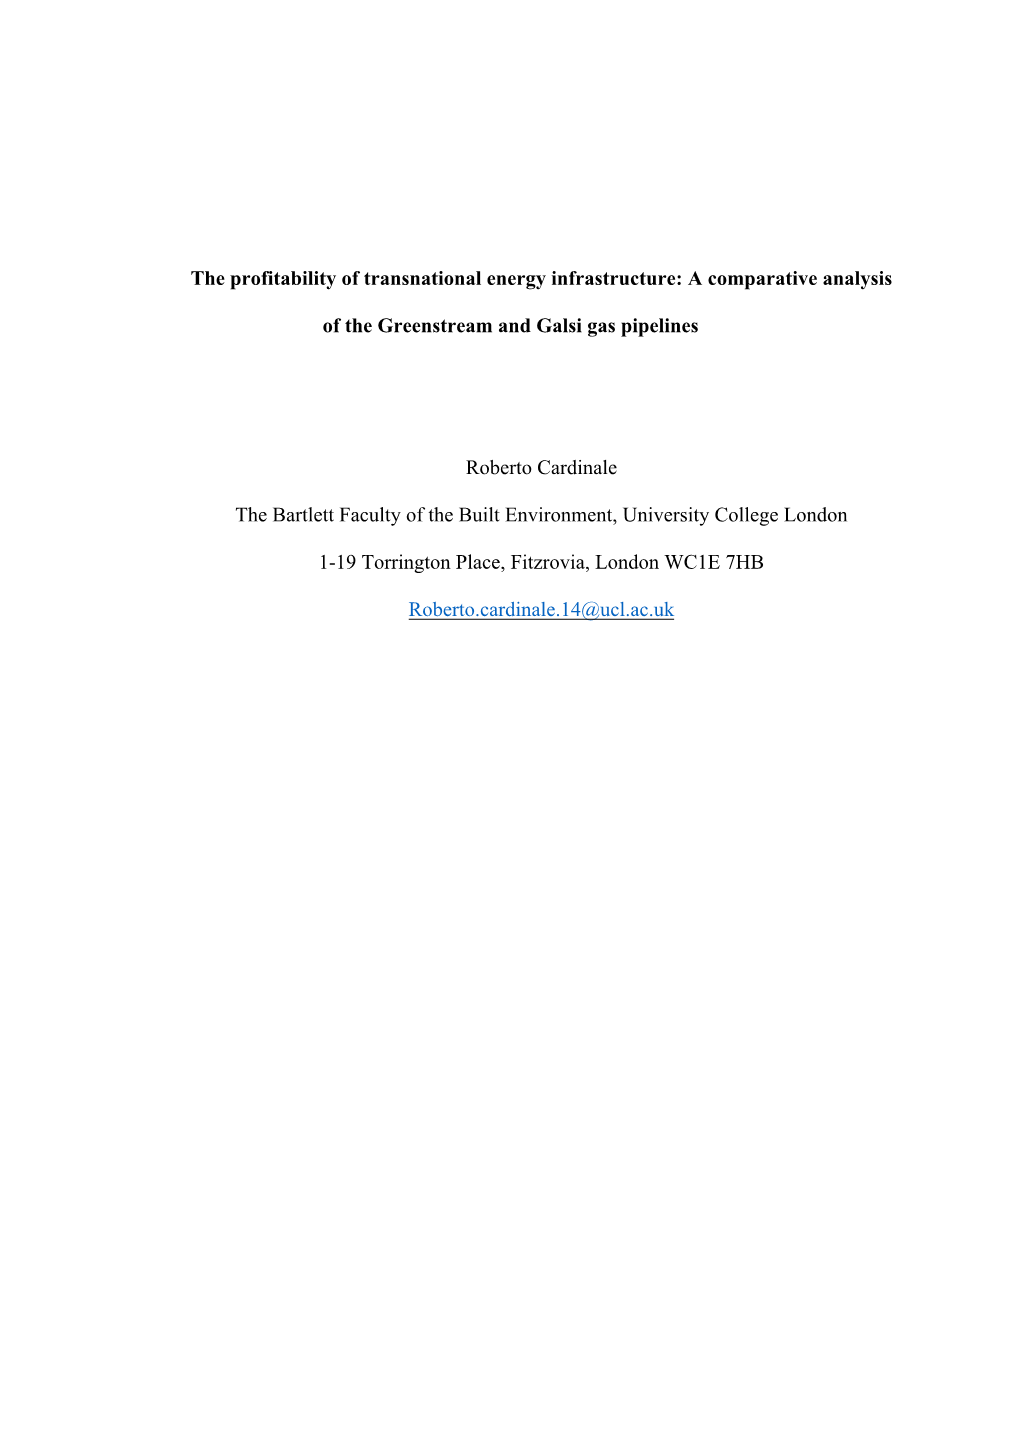 The Profitability of Transnational Energy Infrastructure: a Comparative Analysis